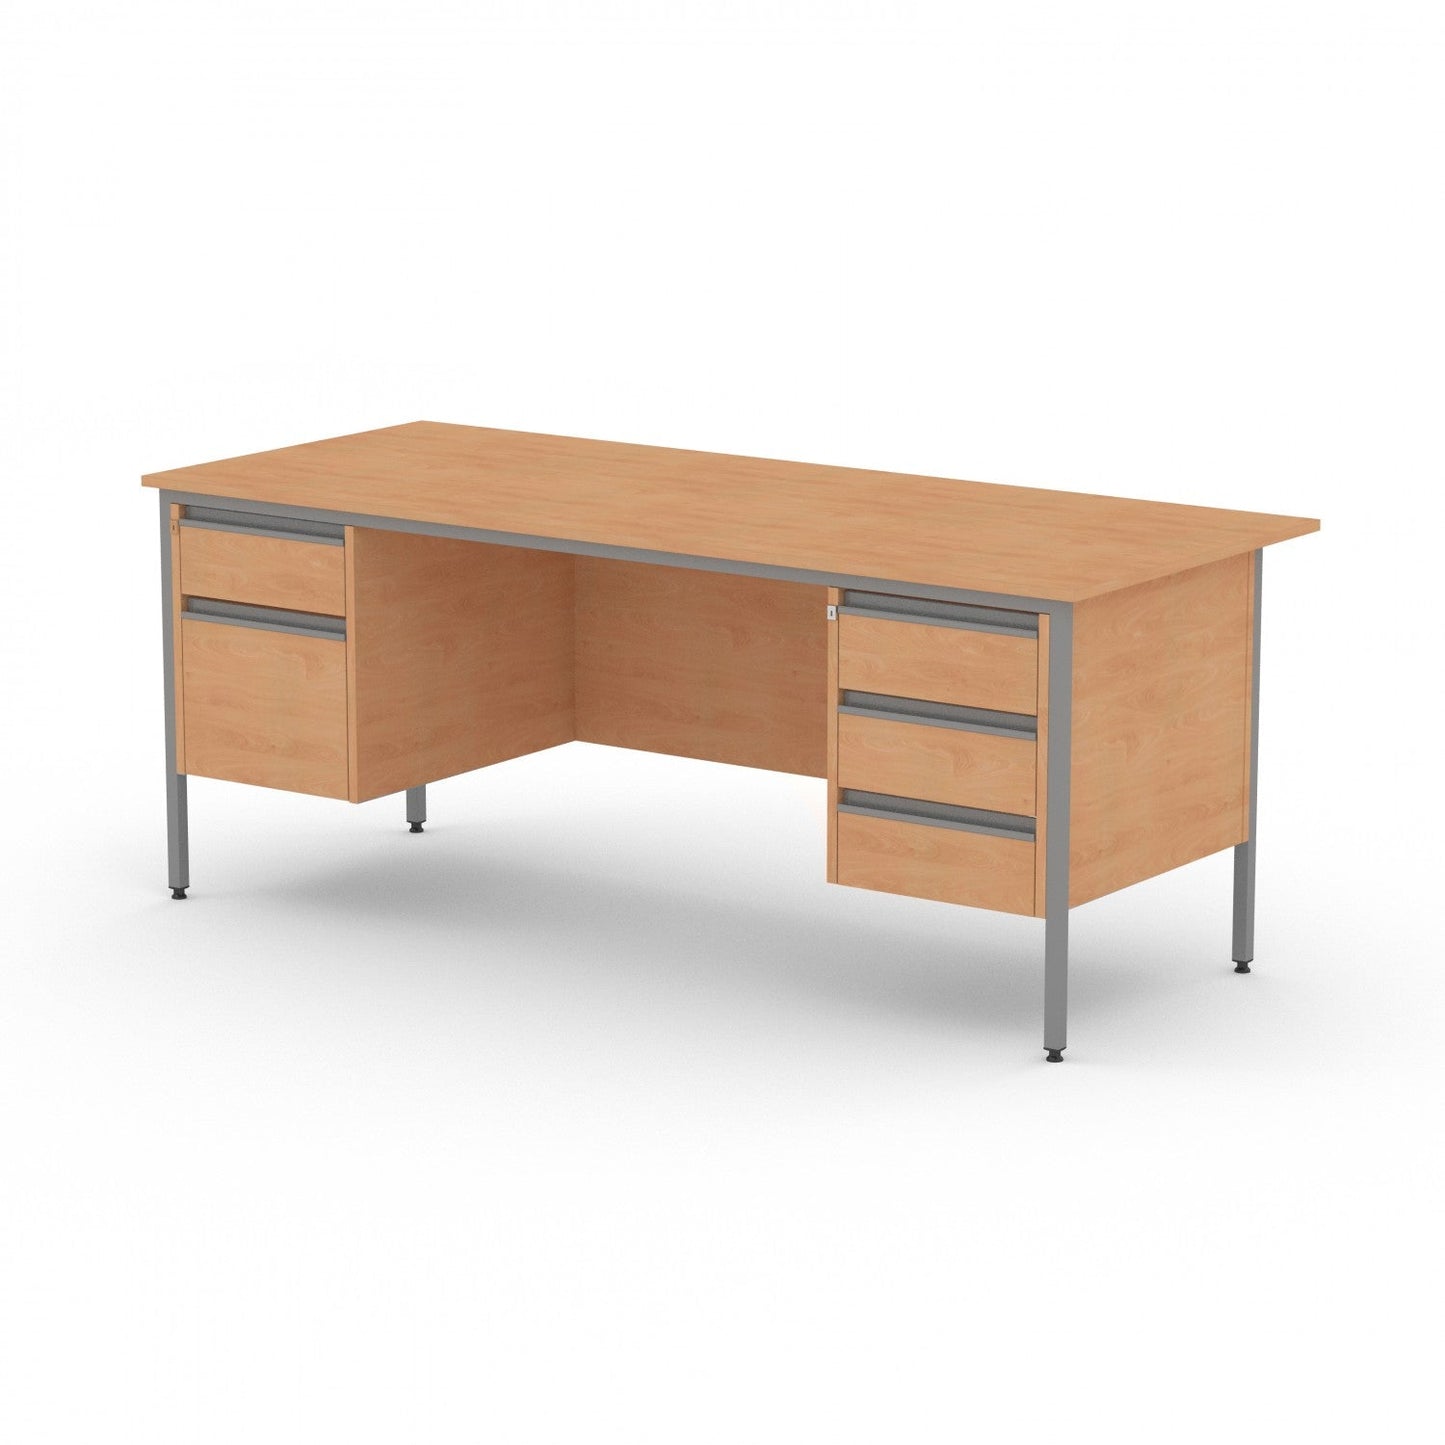 Budget Double 2 and 3 Drawer Pedestal Desk